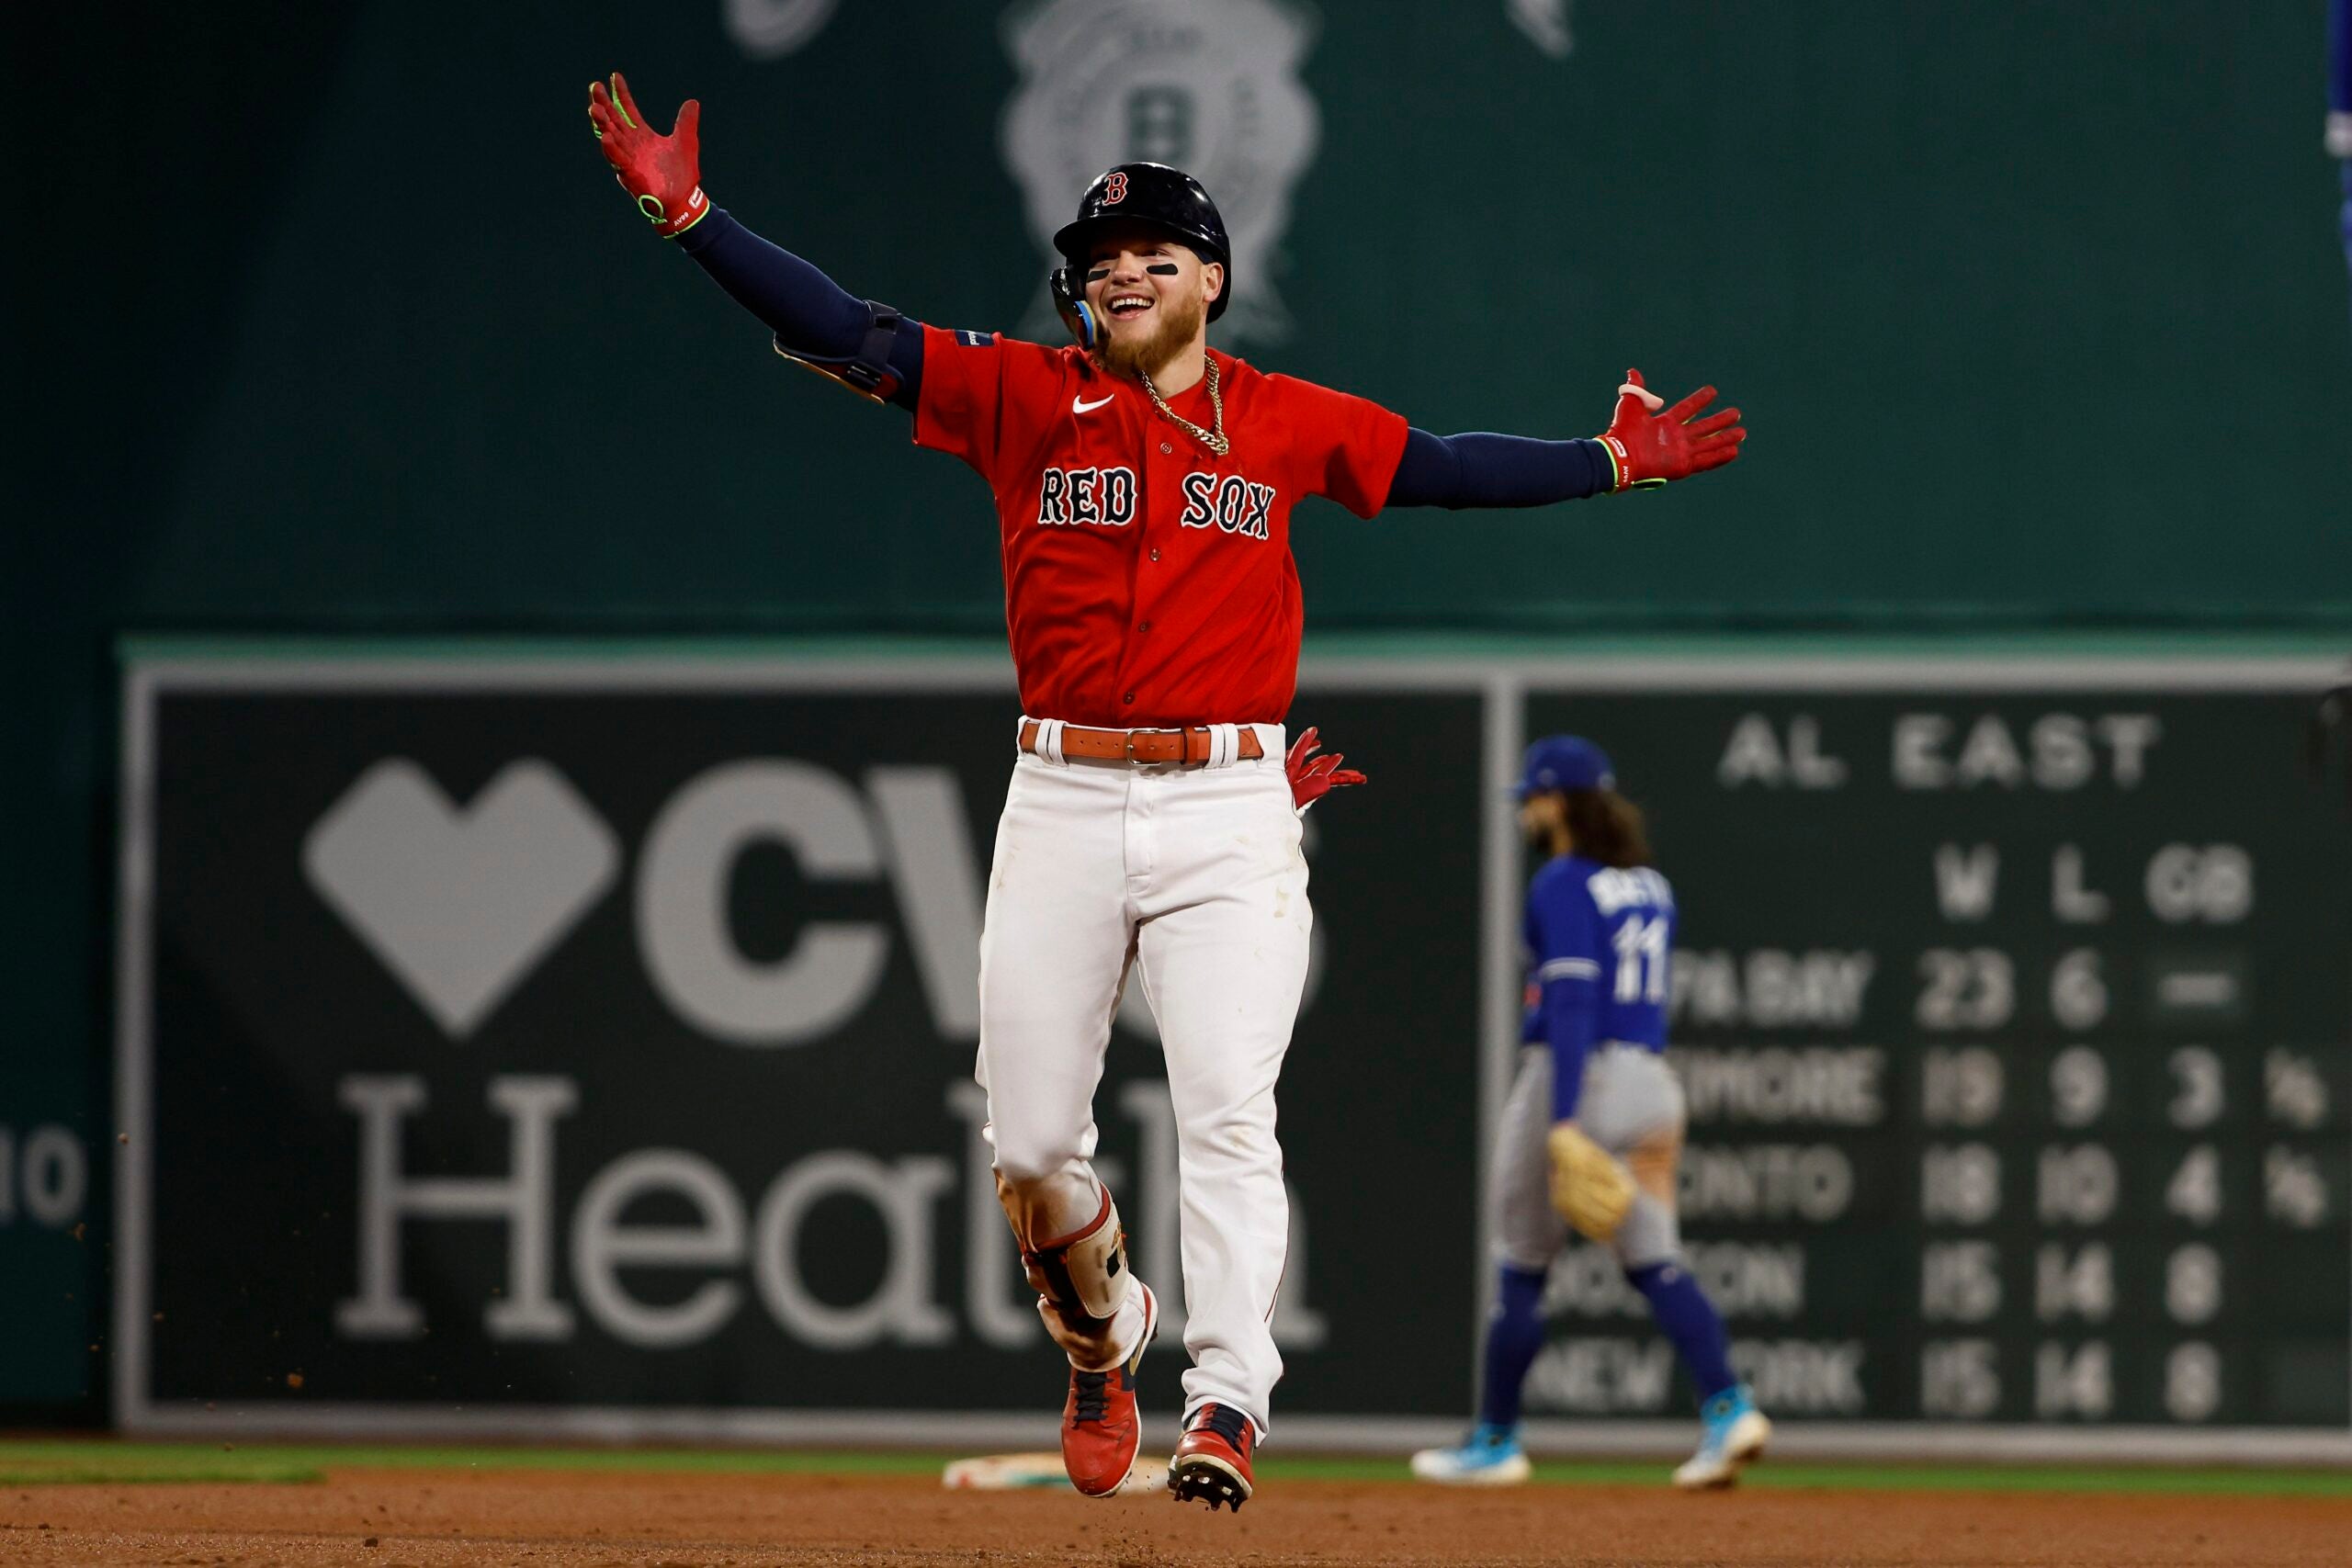 Alex Verdugo #99 of the Boston Red Sox celebrates his walk-off home run as Bo Bichette #11 of the Toronto Blue Jays heads for the clubhouse during the ninth inning at Fenway Park on May 1, 2023 in Boston, Massachusetts.